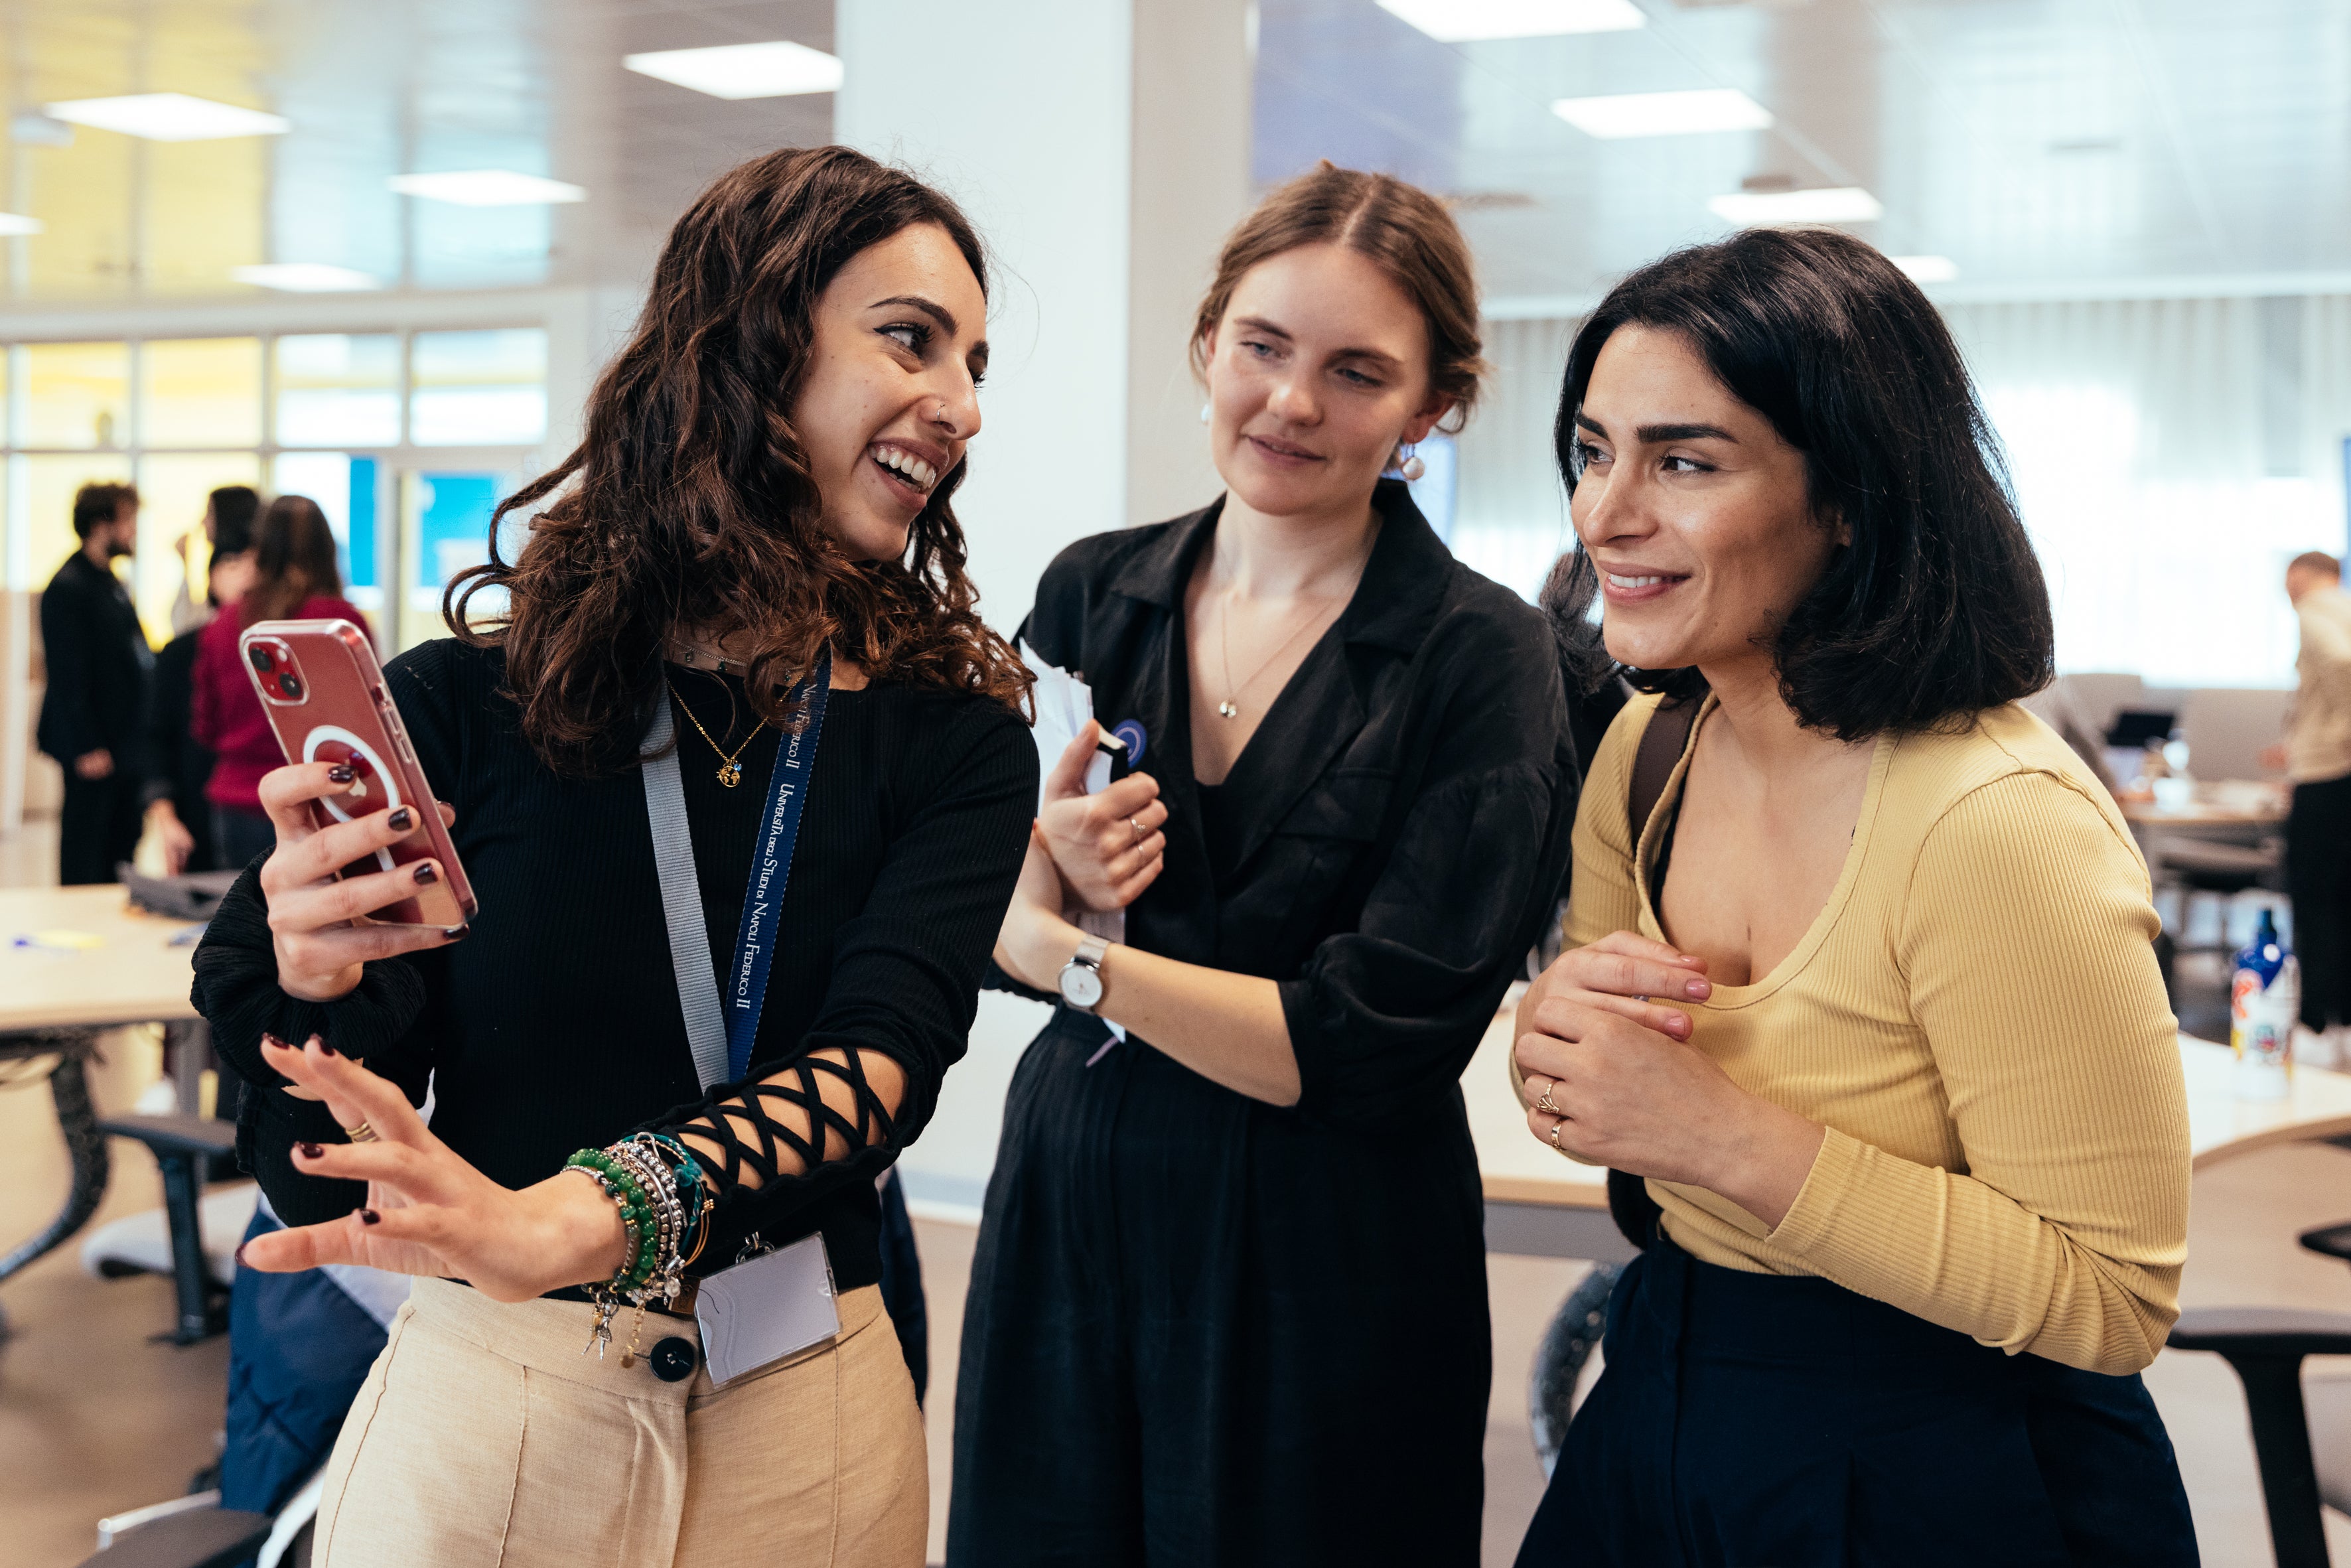 An Apple Developer Academy student shows their app to Melissa Würtz Azari, co-founder and CPO, and Signe Bentzen, Lead Product Designer, of Tiimo